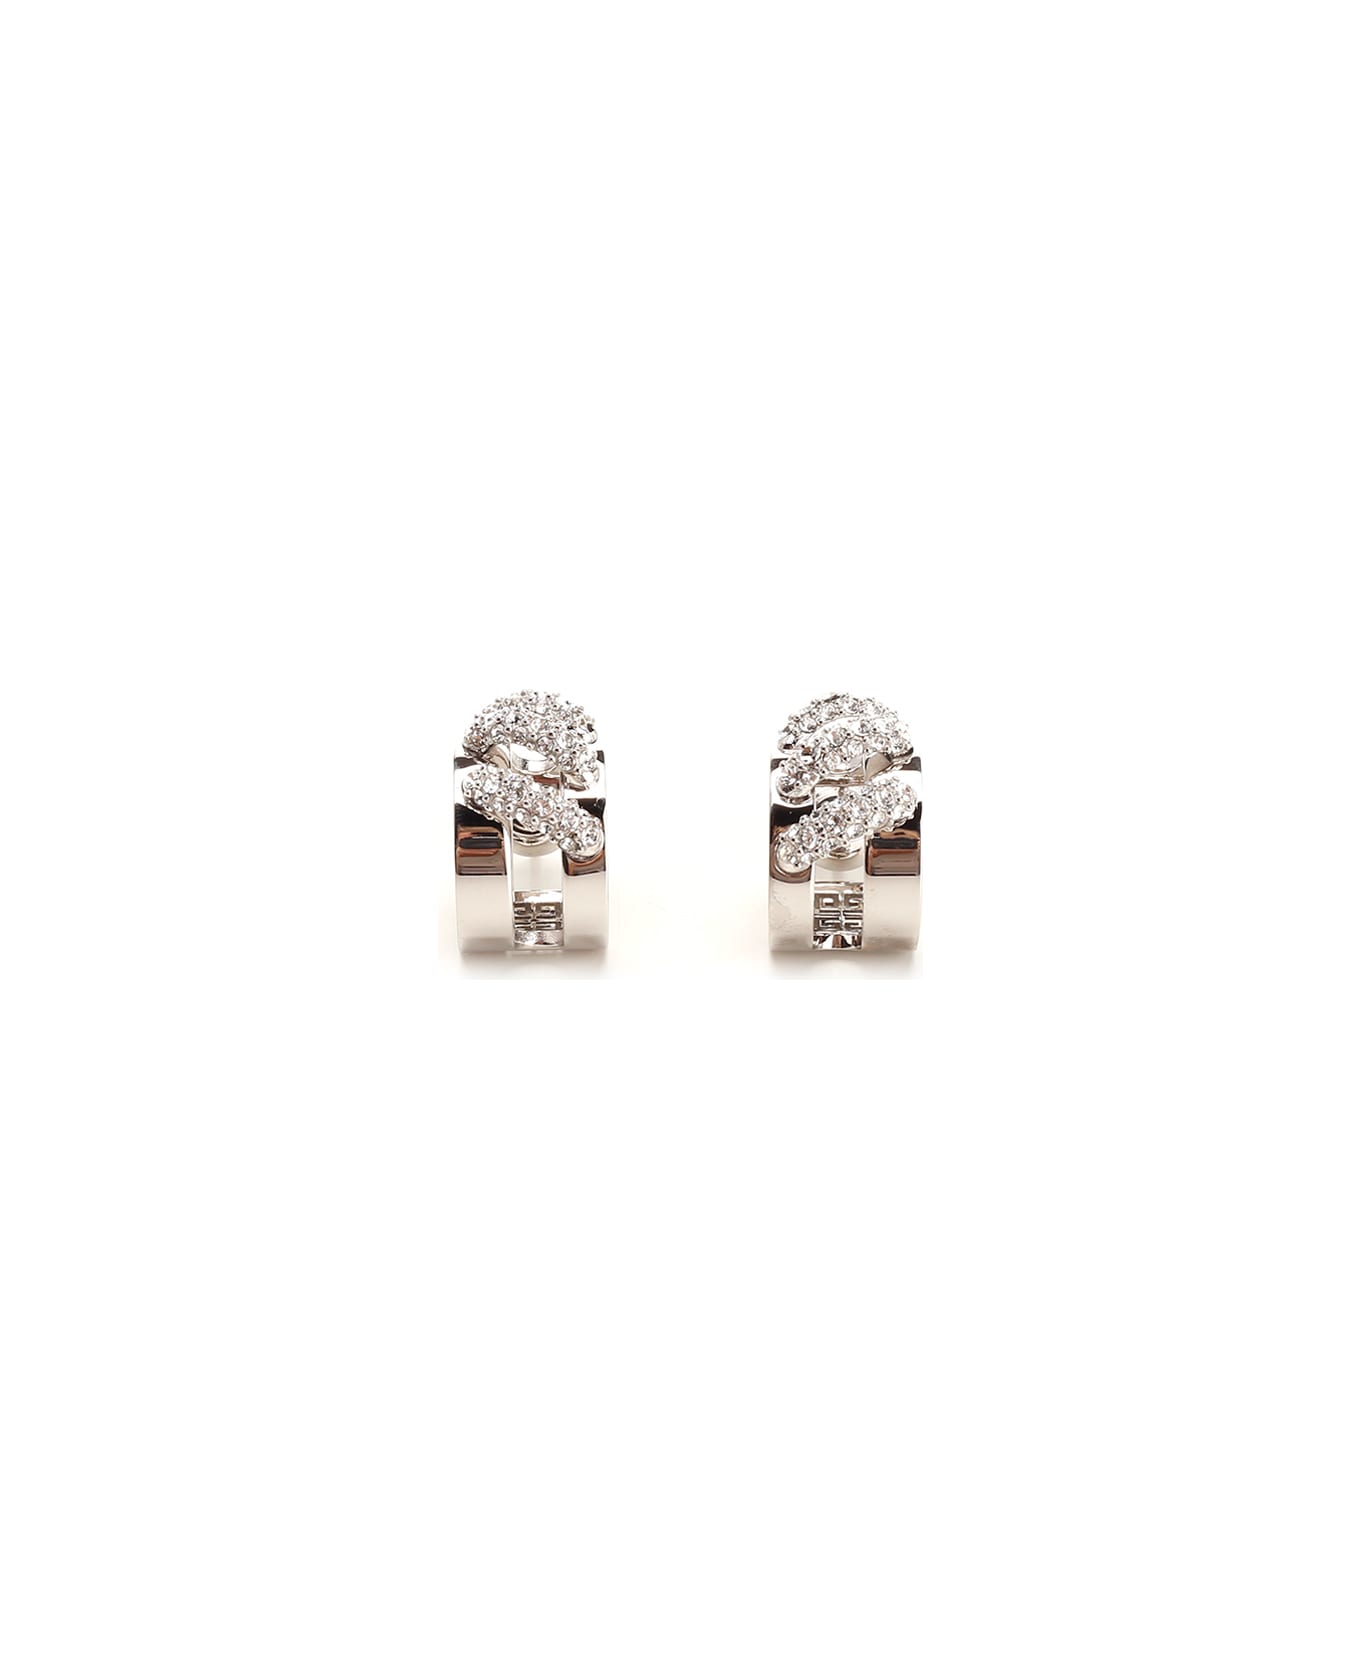 Givenchy 'stitch' Earrings - SILVERY